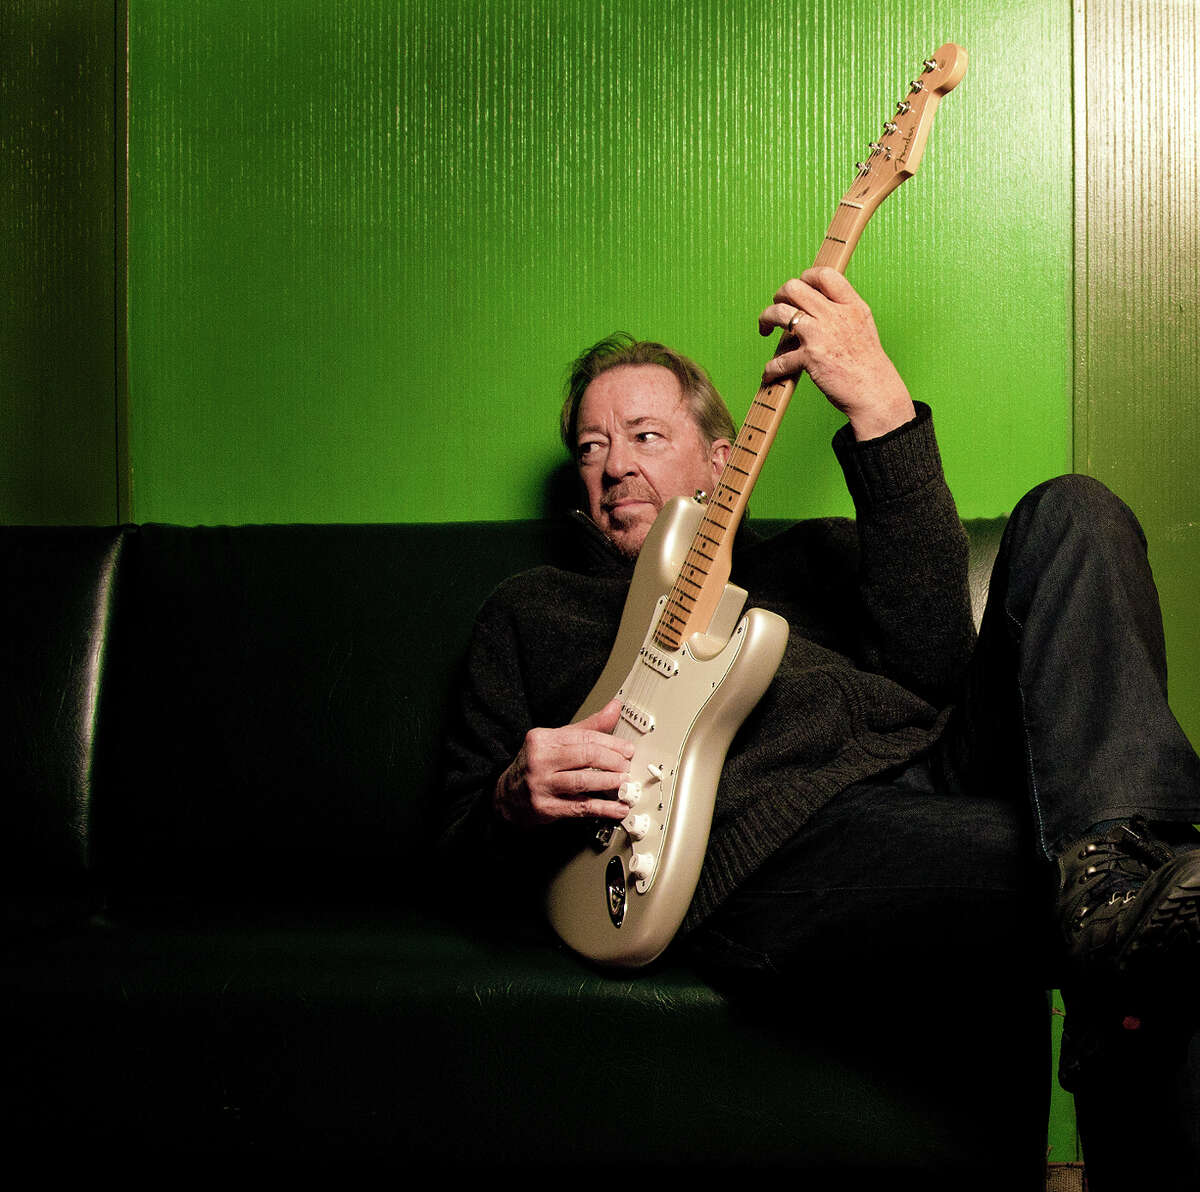 Boz Scaggs chose Royal Recordings Studio for his new soulful album, "Memphis." The studio recorded acts including Al Green, Syl Johnson and O.V. Wright.